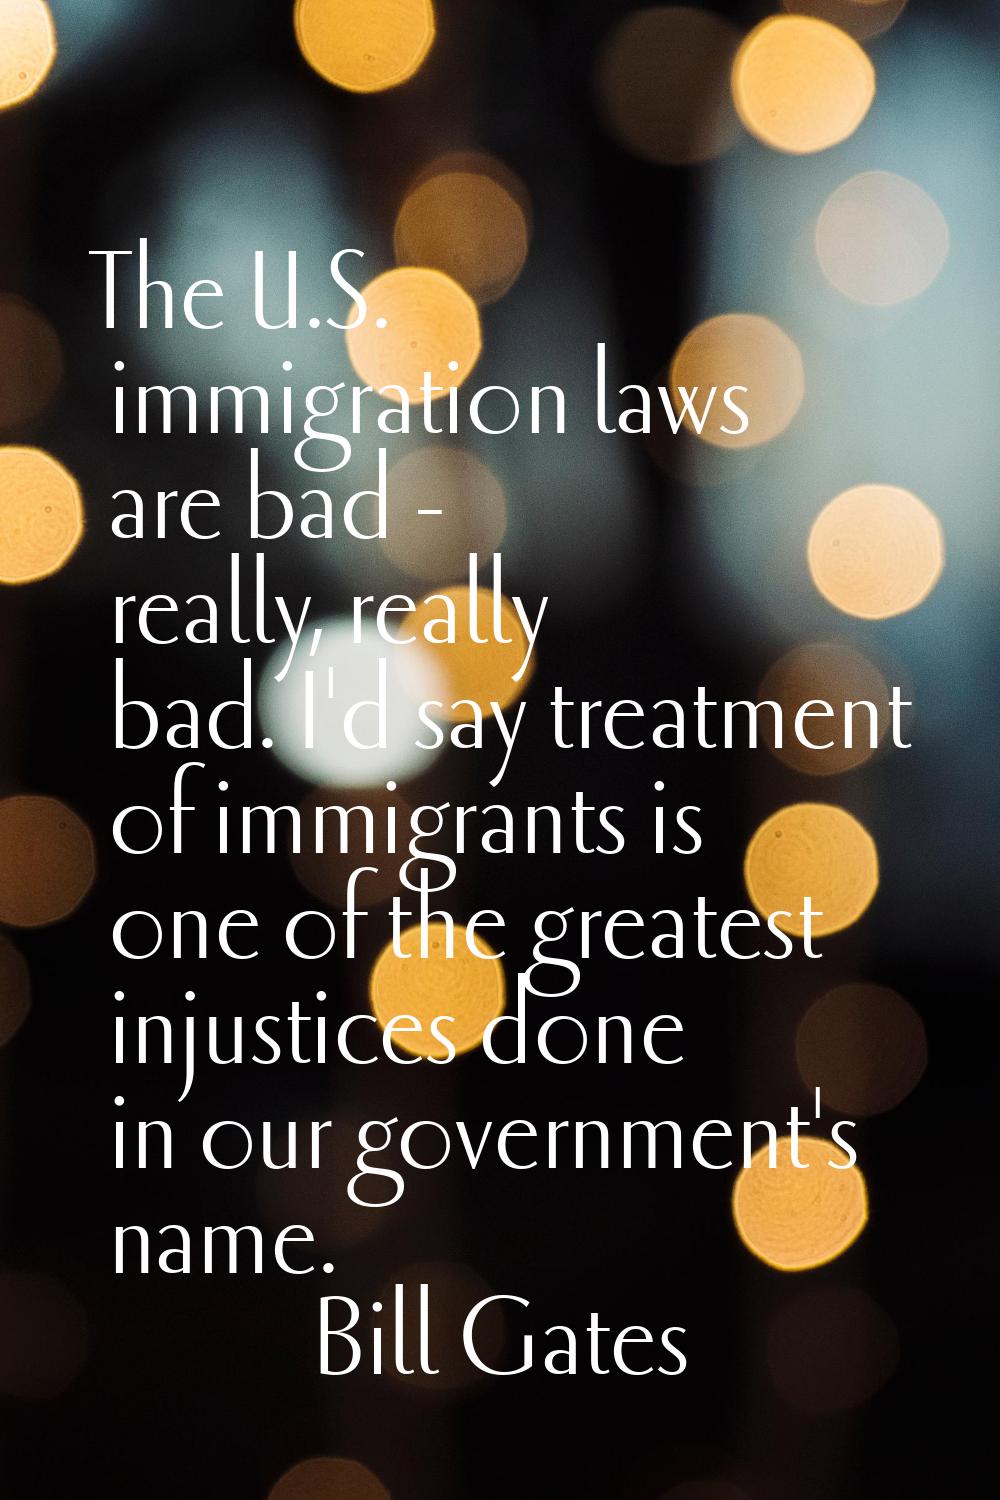 The U.S. immigration laws are bad - really, really bad. I'd say treatment of immigrants is one of t